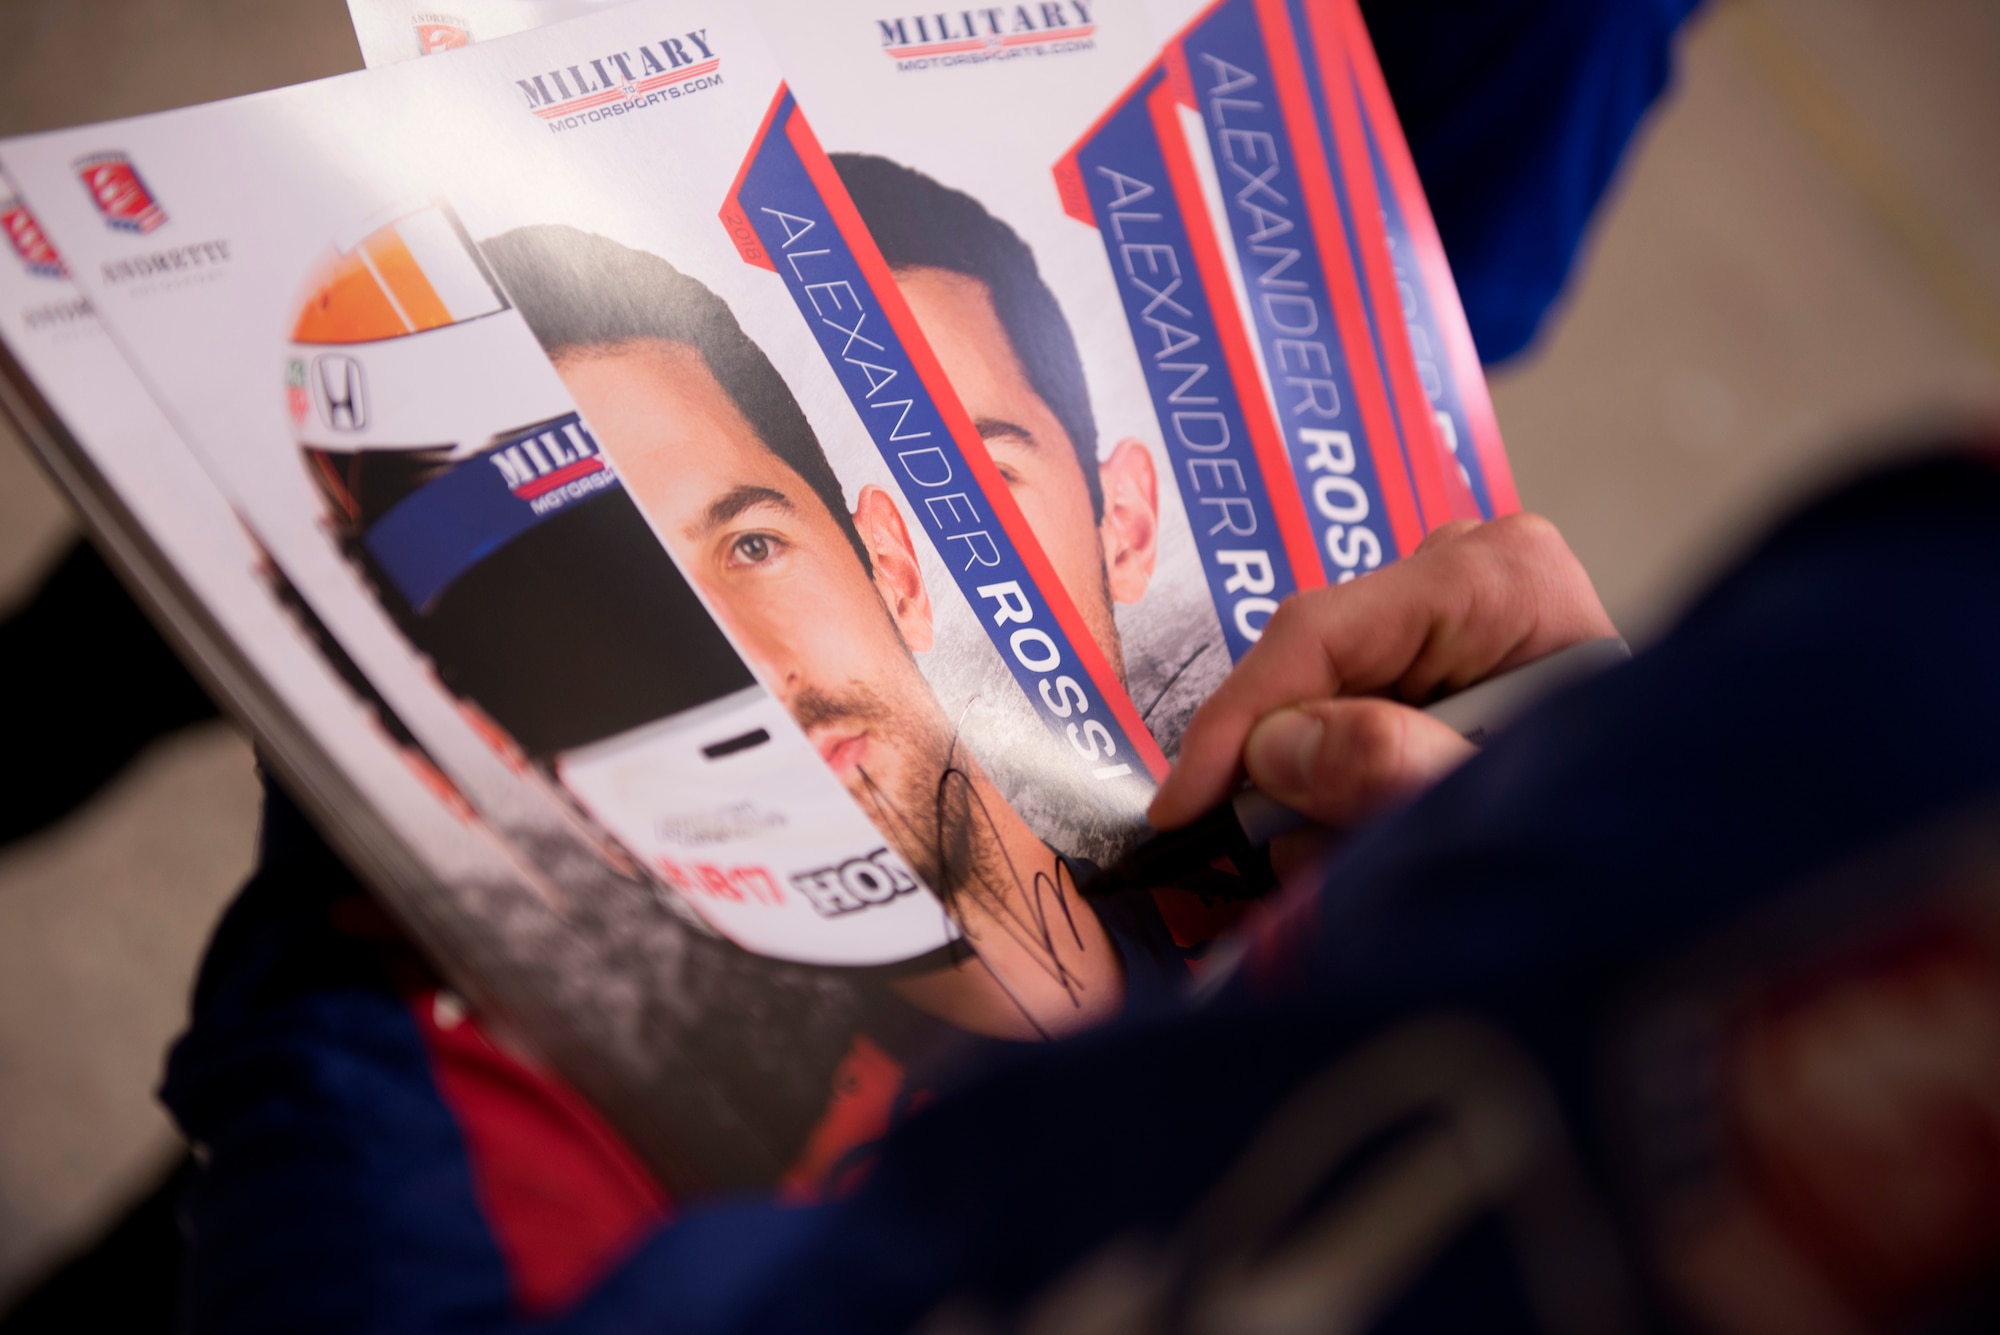 Alexander Rossi, Andretti Autosport racecar driver, autographs photos of himself to hand out to Airmen at Luke Air Force Base, Ariz., April 5, 2018. Rossi visited the base as part of a small delegation from Andretti Autosport in order to learn more and the mission and Airmen here. (U.S. Air Force photo by Senior Airman Ridge Shan)